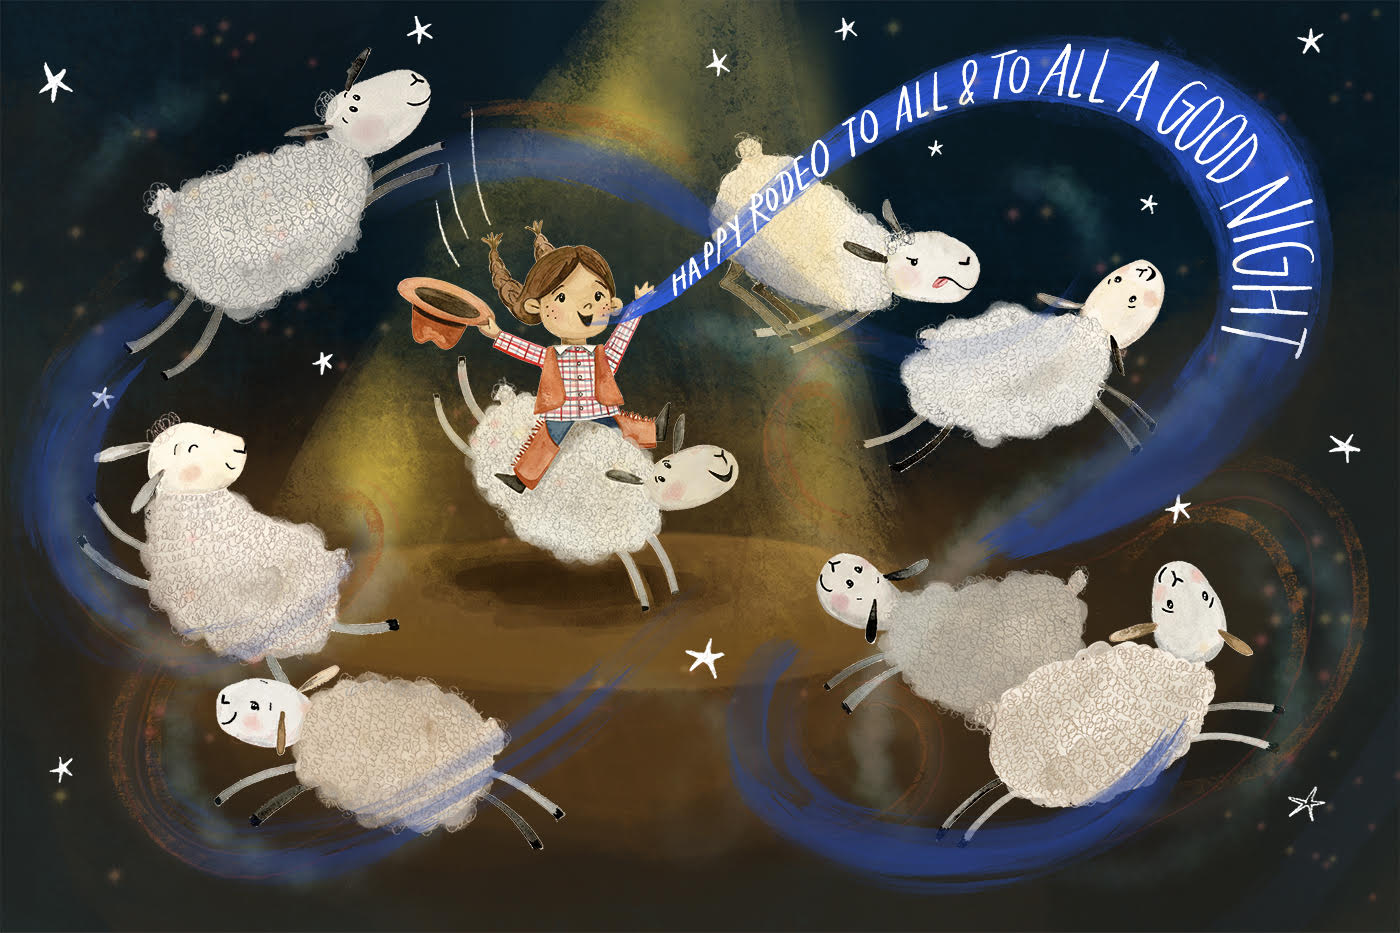 Illustration of a little girl mutton busting in her dreams the night before the rodeo.